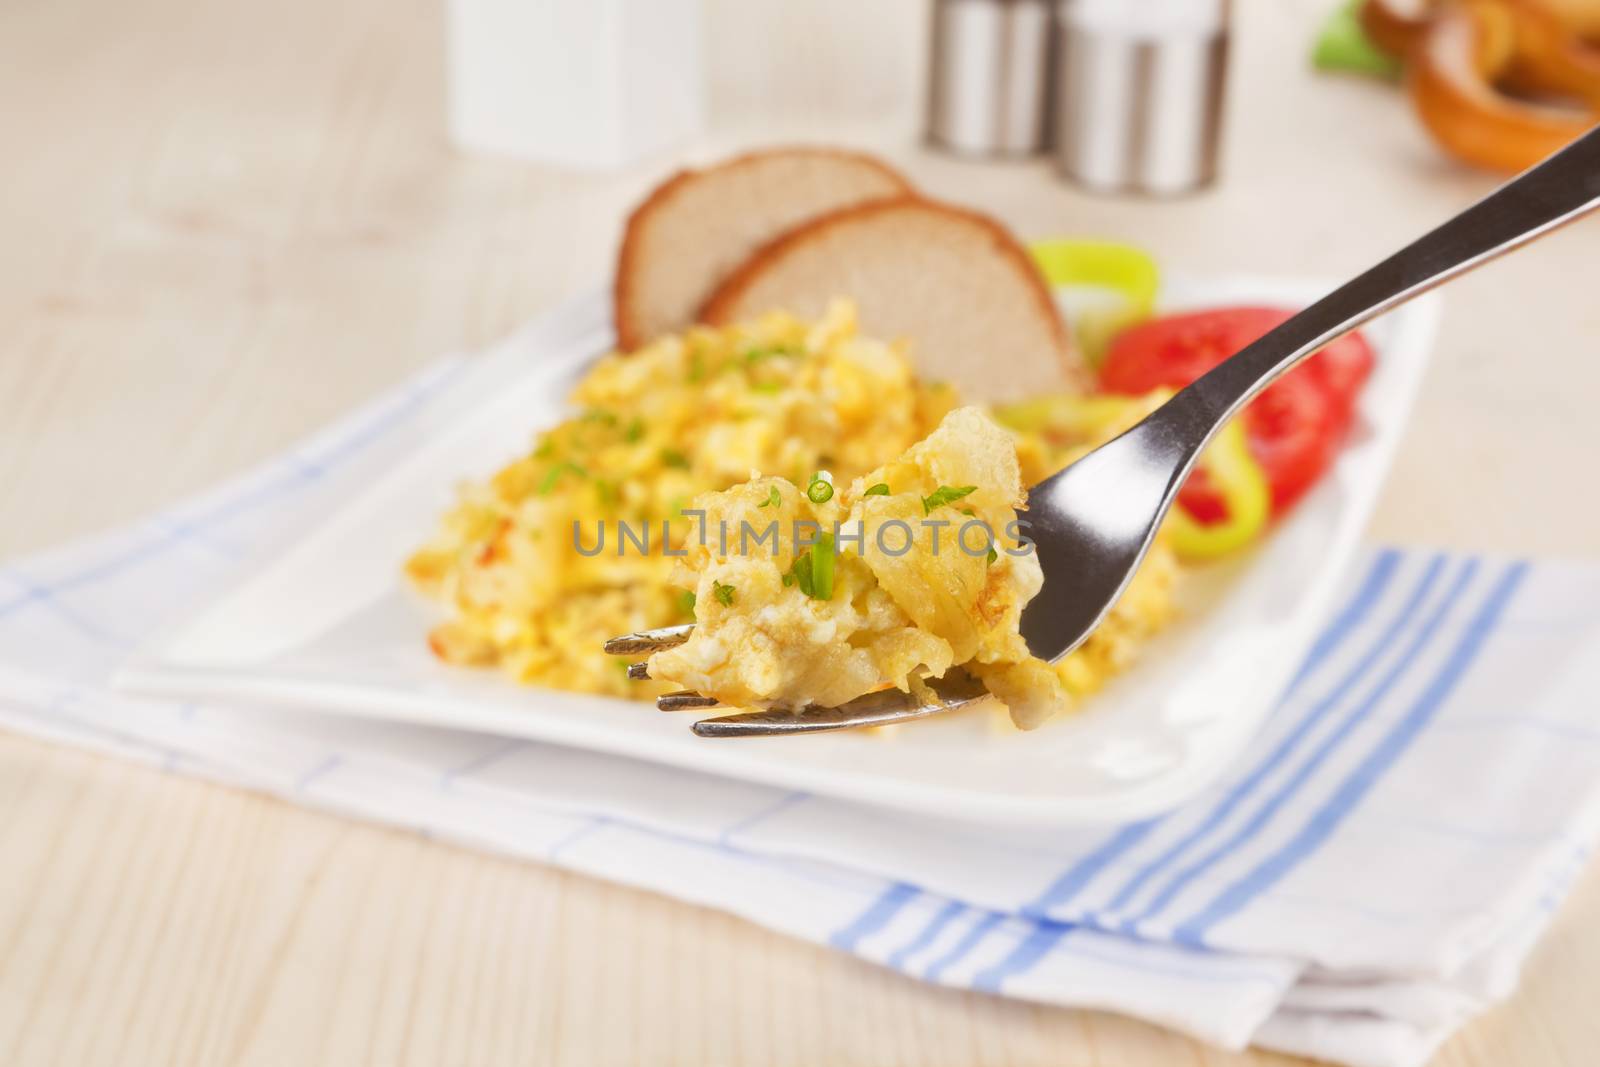 Culinary breakfast. Scrambled eggs on fork, pastry, salt and pepper shaker in background. Breakfast concept.